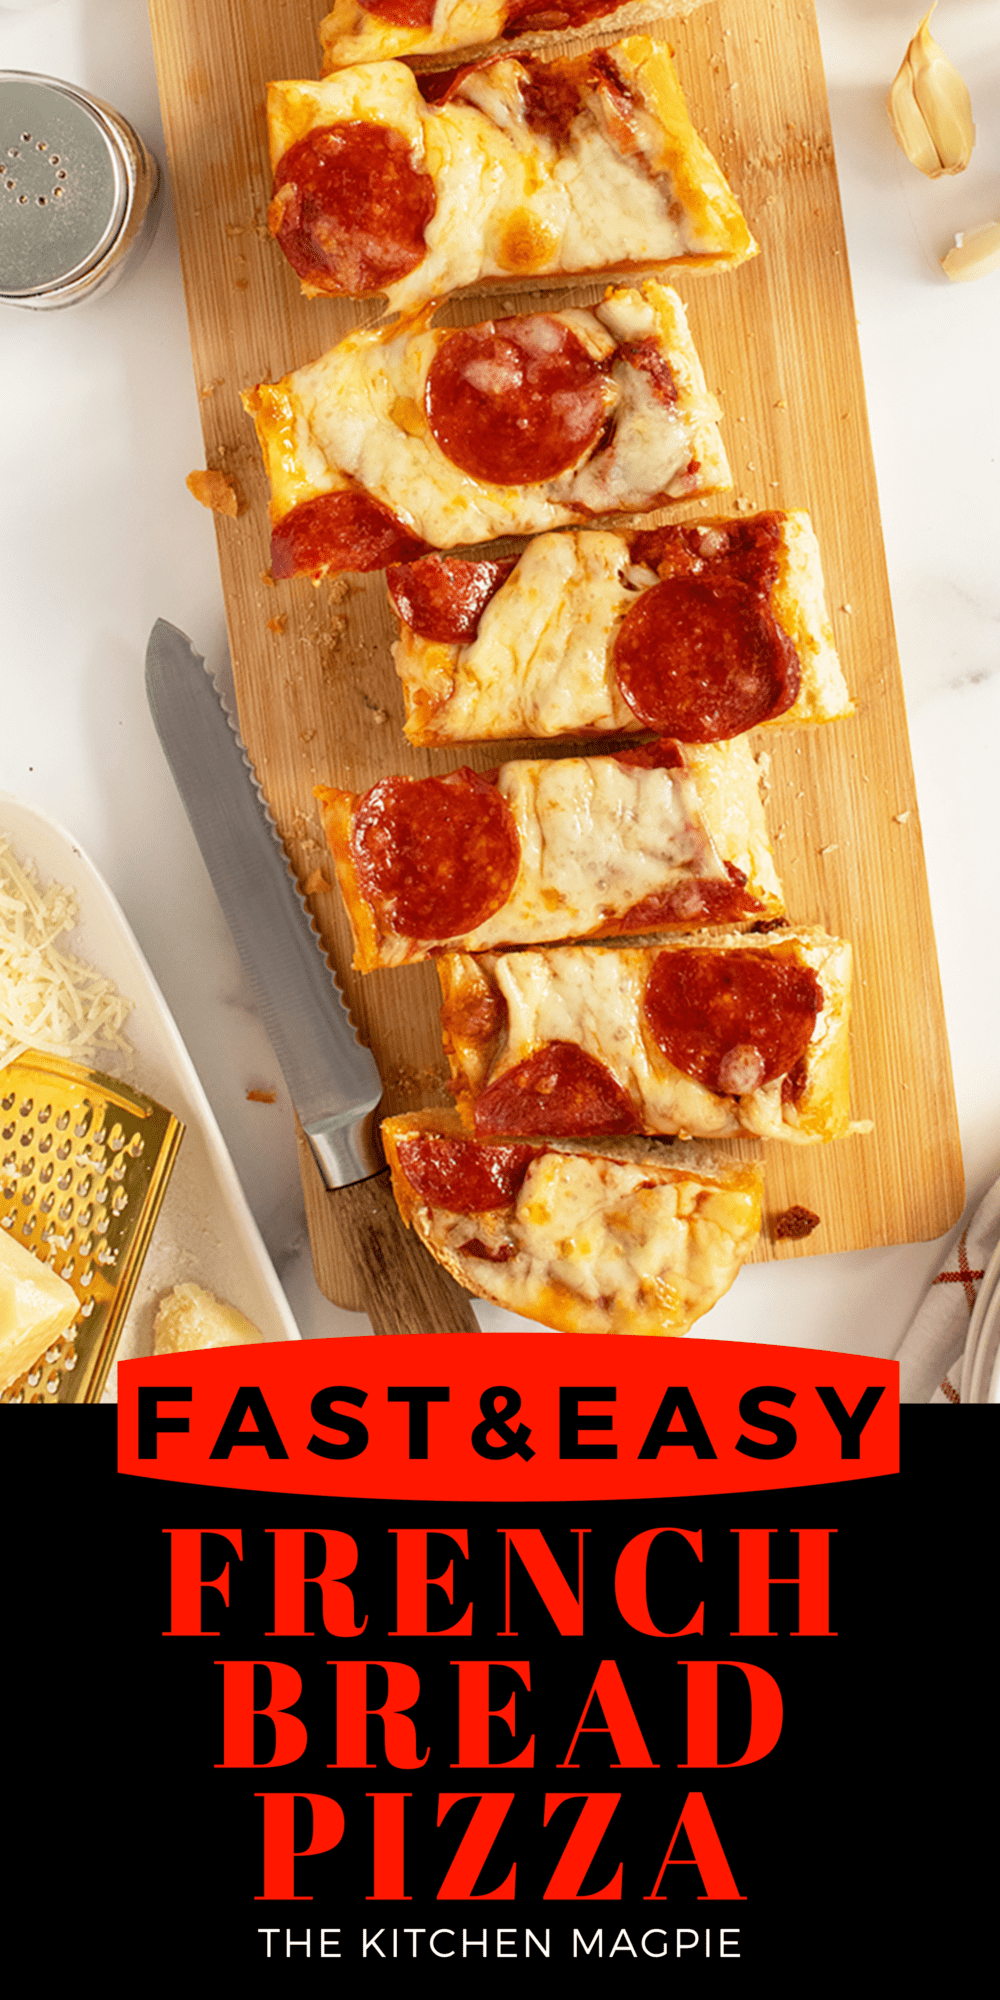 Using the cheat of a simple loaf of French bread, you can recreate the entire pizza experience with minimal effort and time!